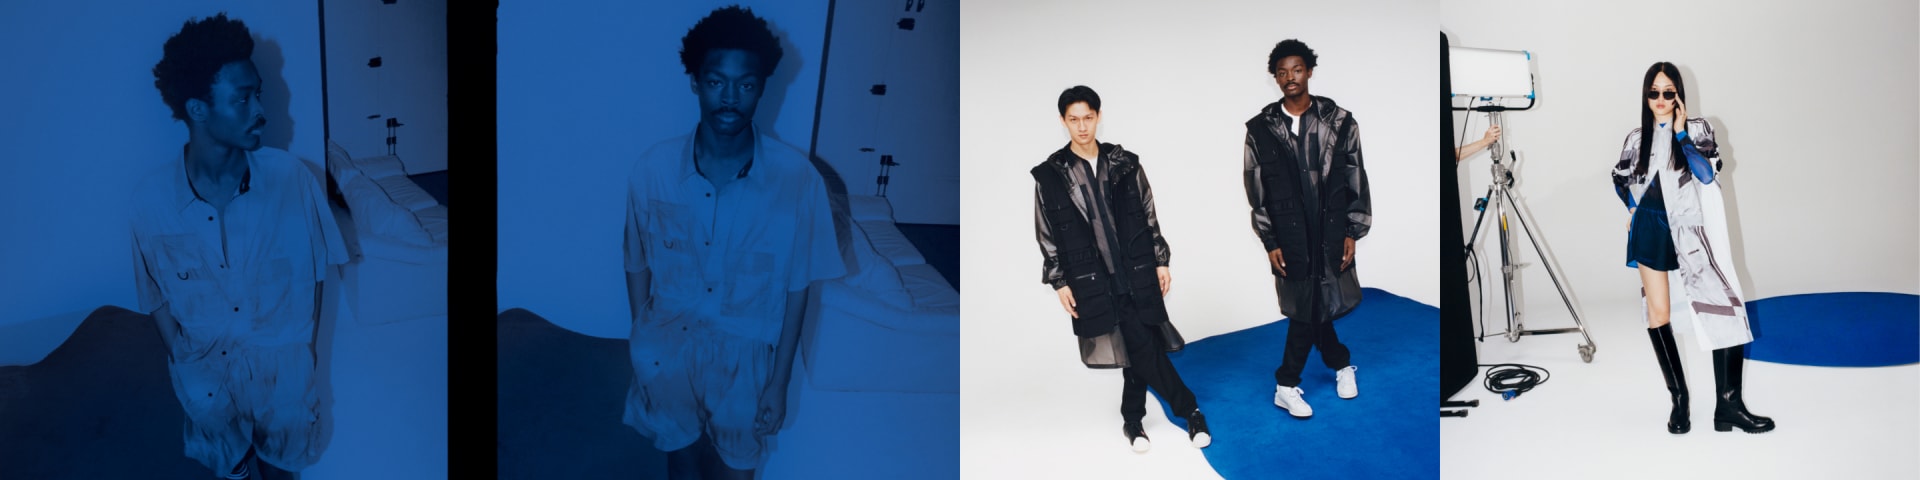 Four images of models sporting garments from the new Blue Version collection including a hooded raincoat and lightweight windbreaker.